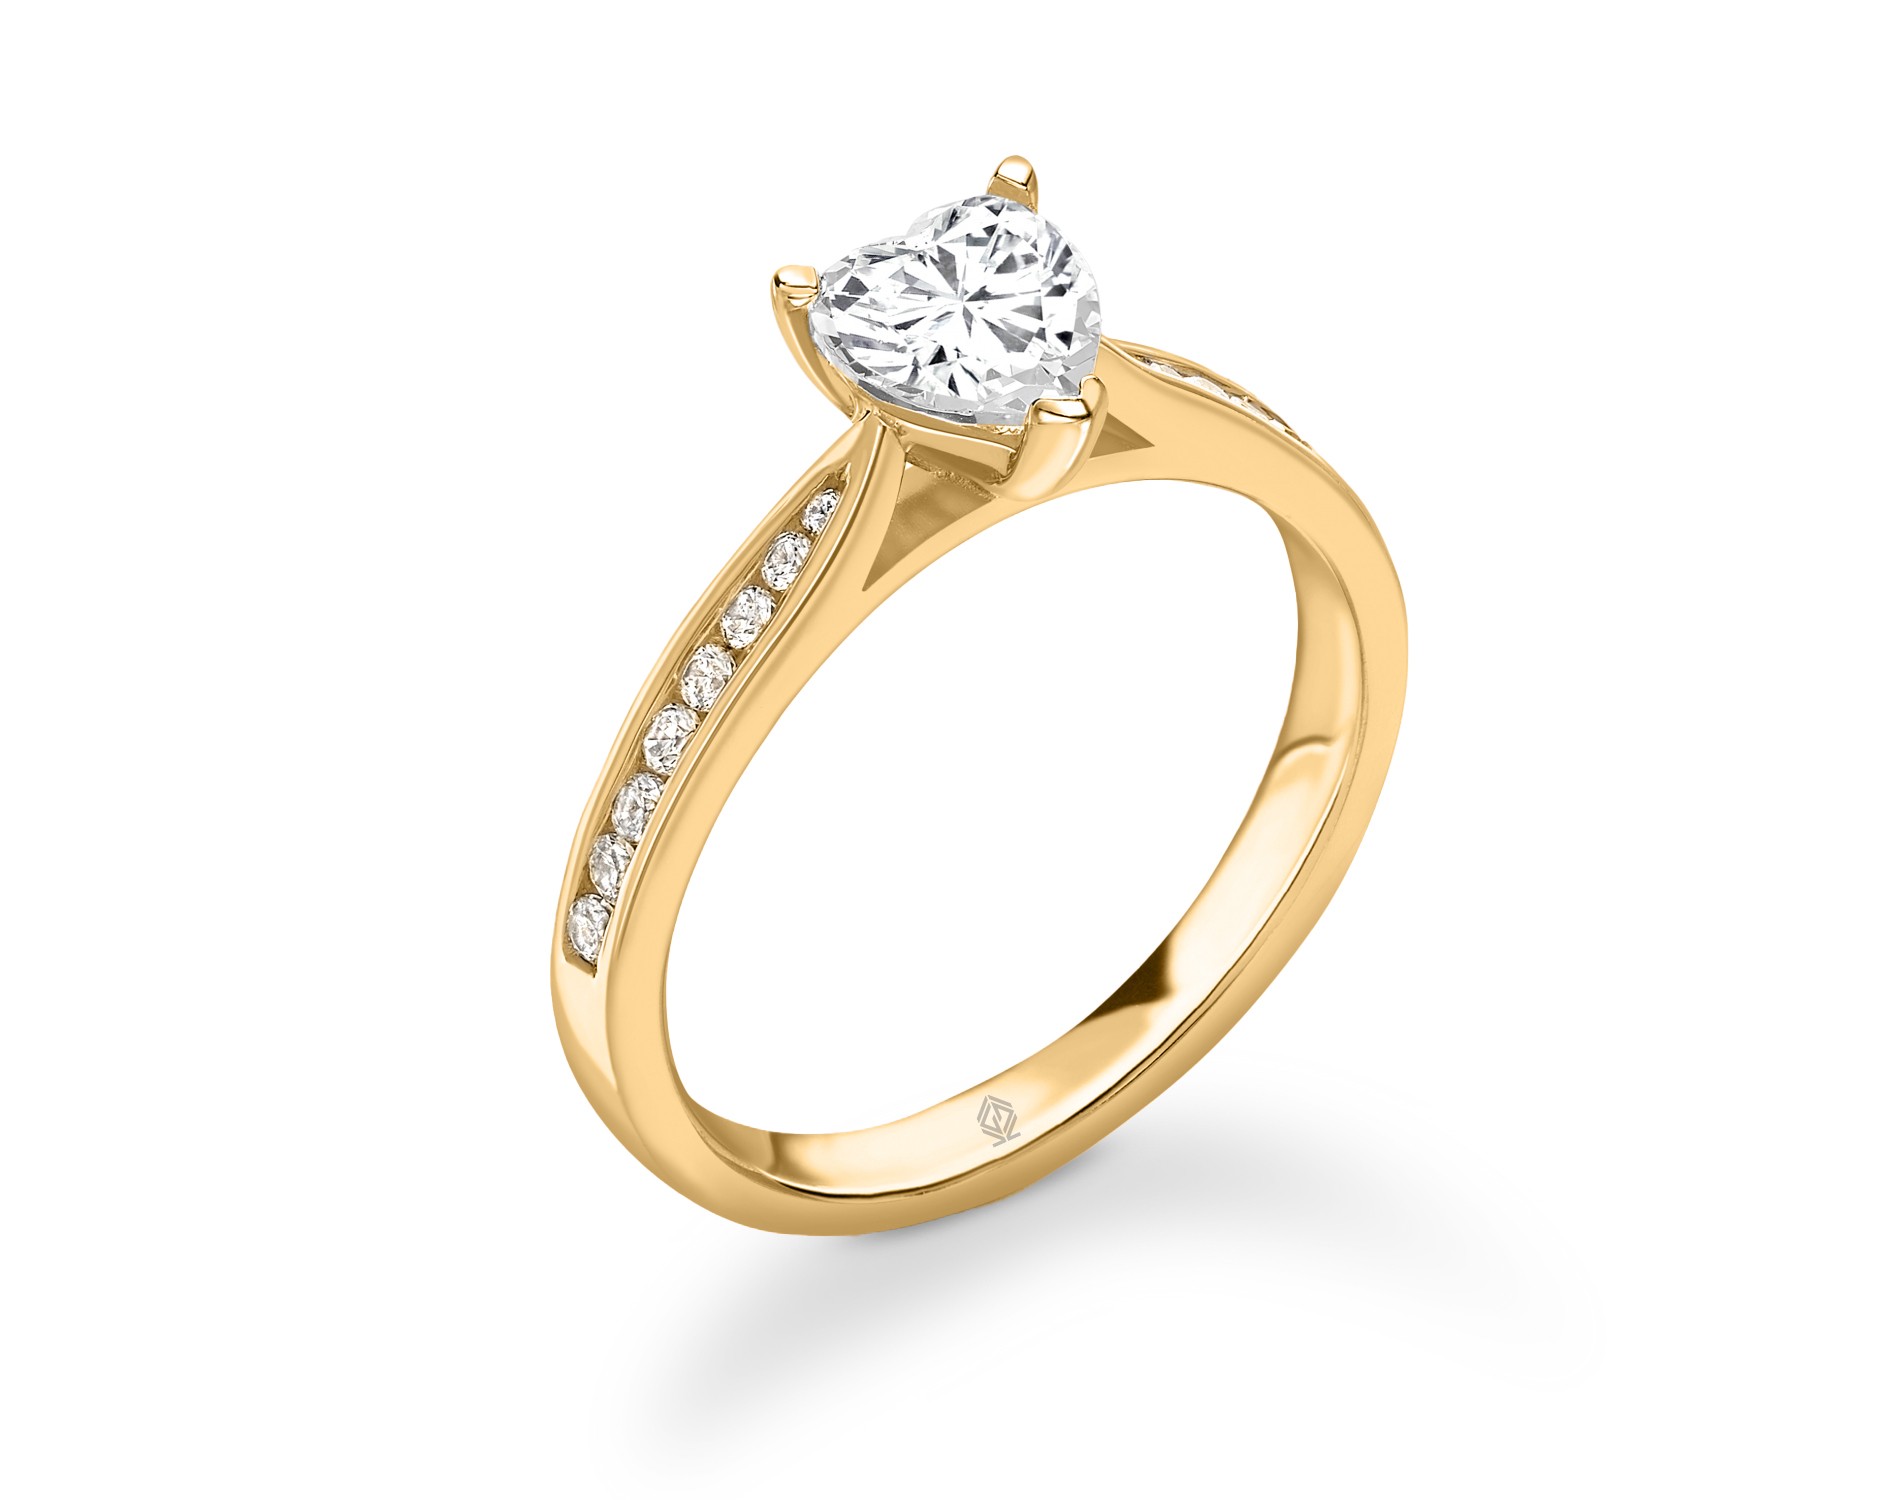 18K YELLOW GOLD HEART CUT DIAMOND ENGAGEMENT RING WITH SIDE STONES CHANNEL SET